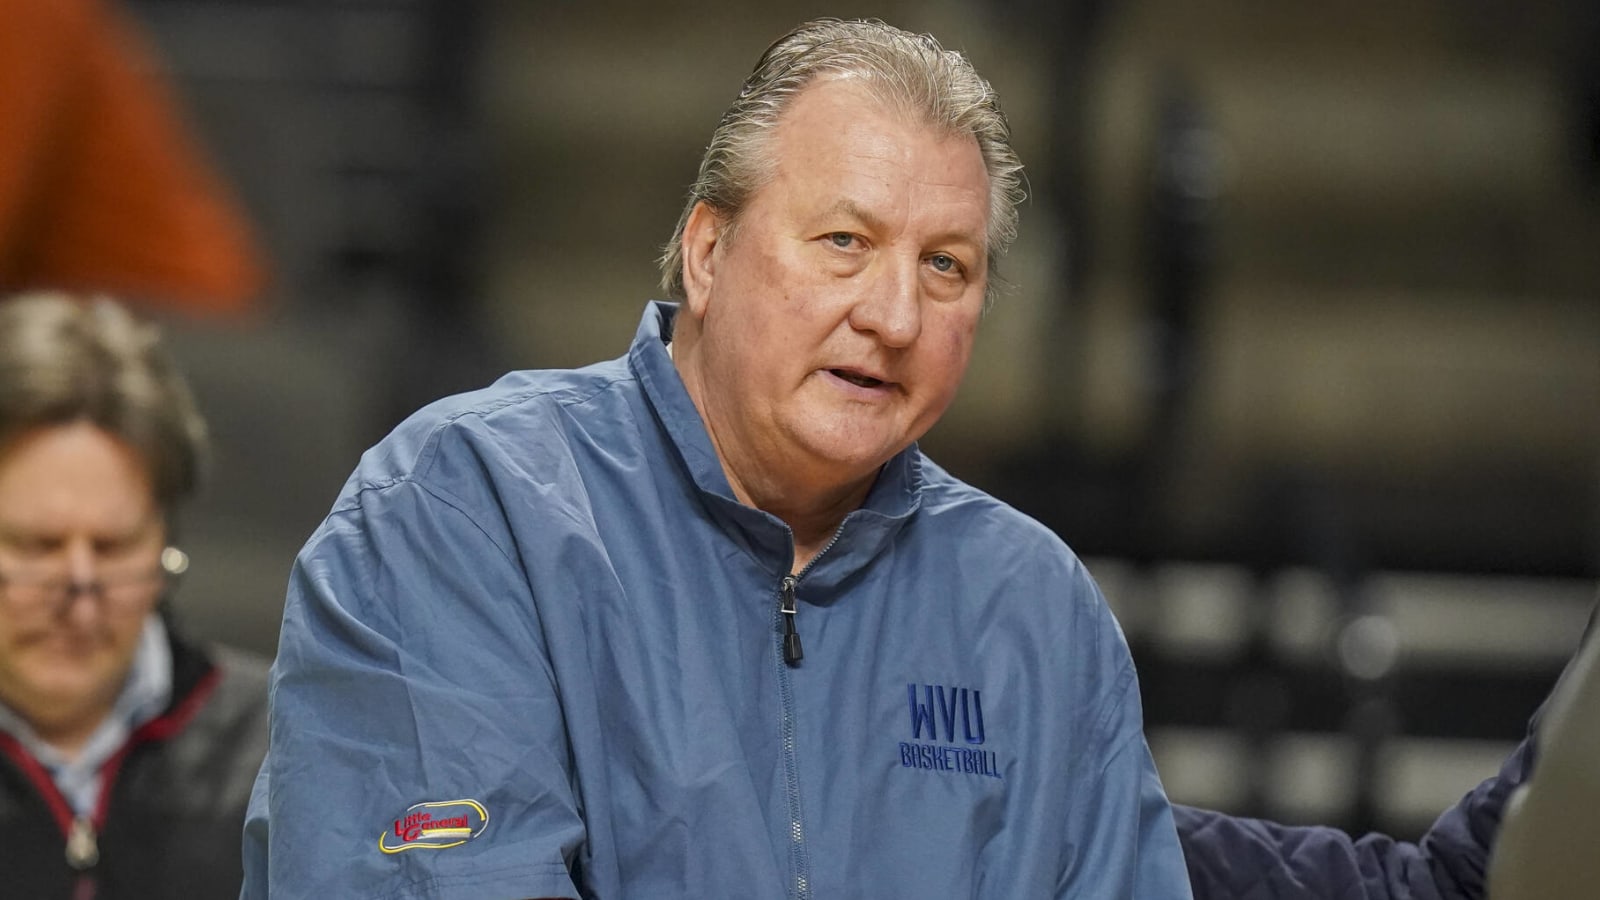 Bob Huggins uses offensive slur on air during radio interview